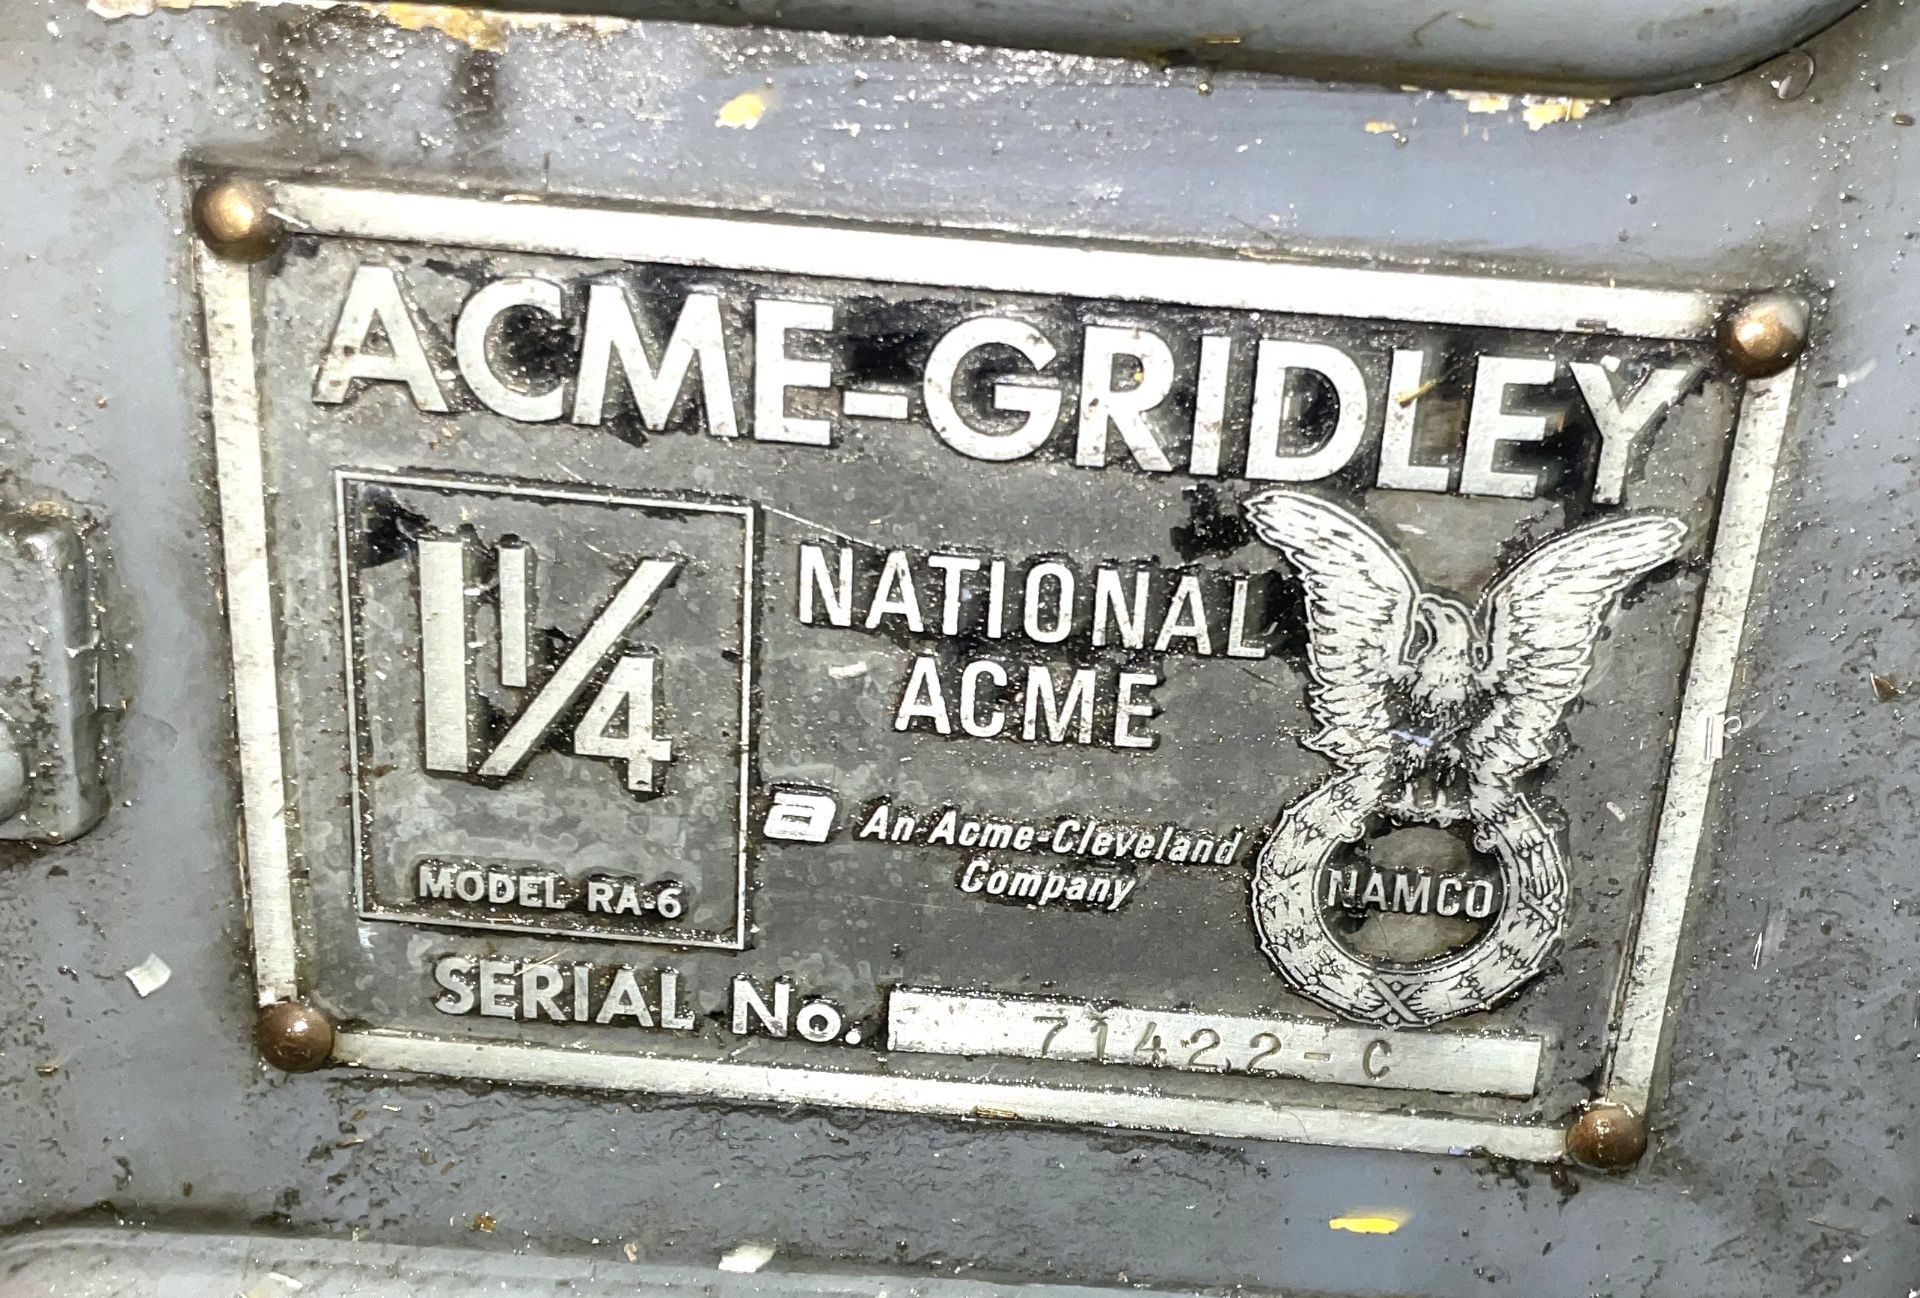 1-1/4" RA-6 Acme Gridley Screw Machine with Threading and pick off 71422-C   location: Oregon - Image 5 of 10